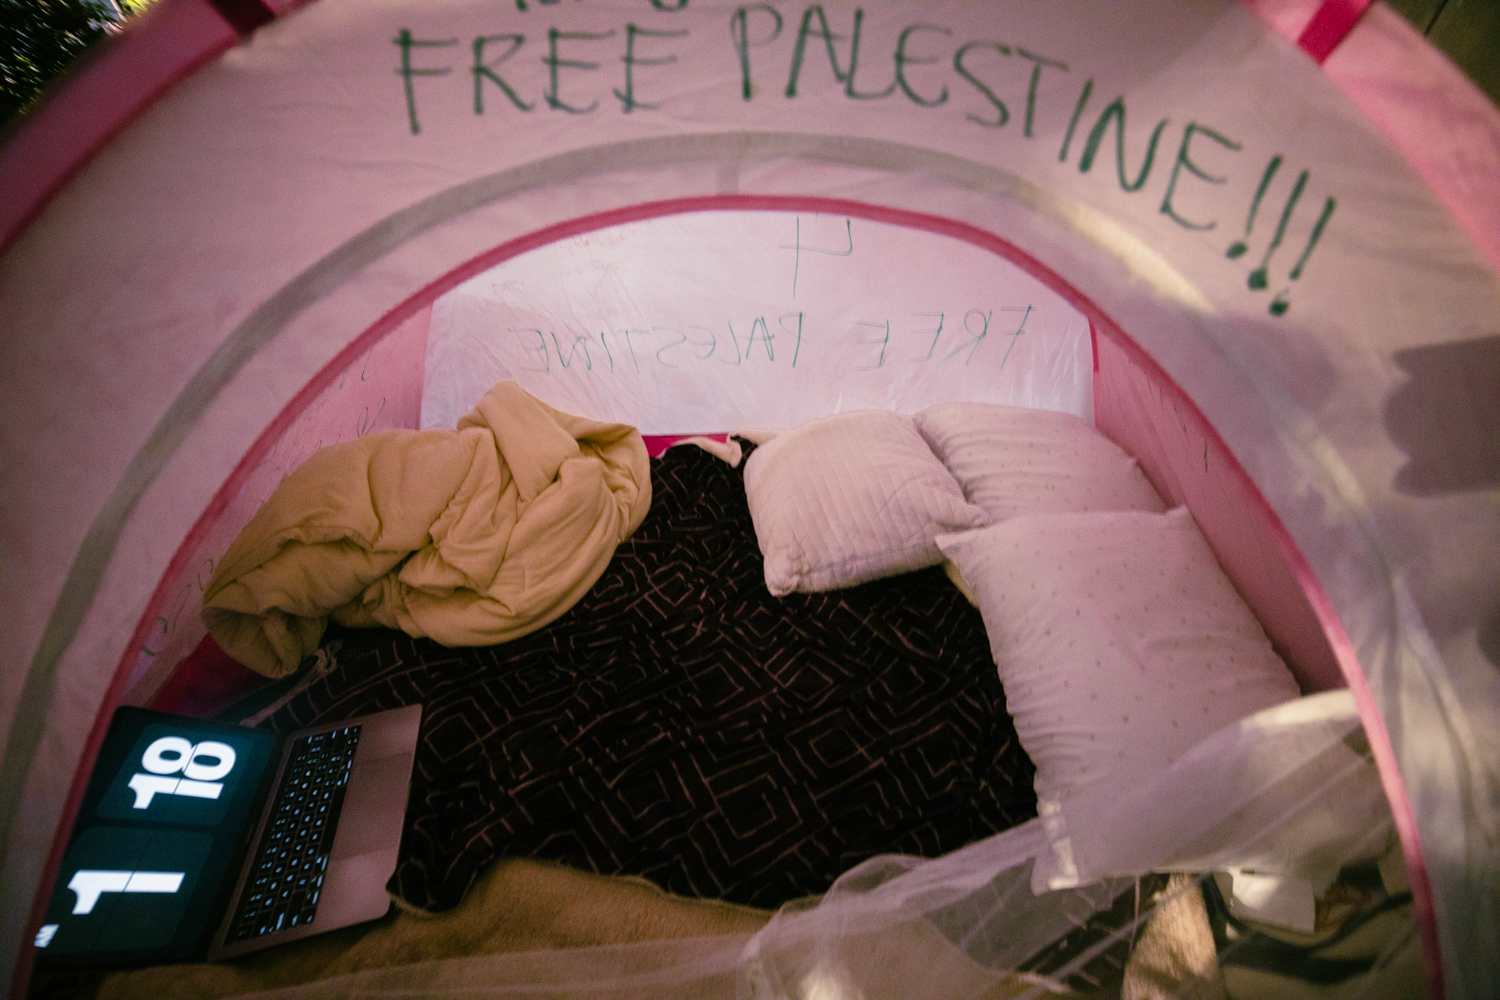 A pink tent with pillows, blankets and a laptop inside.